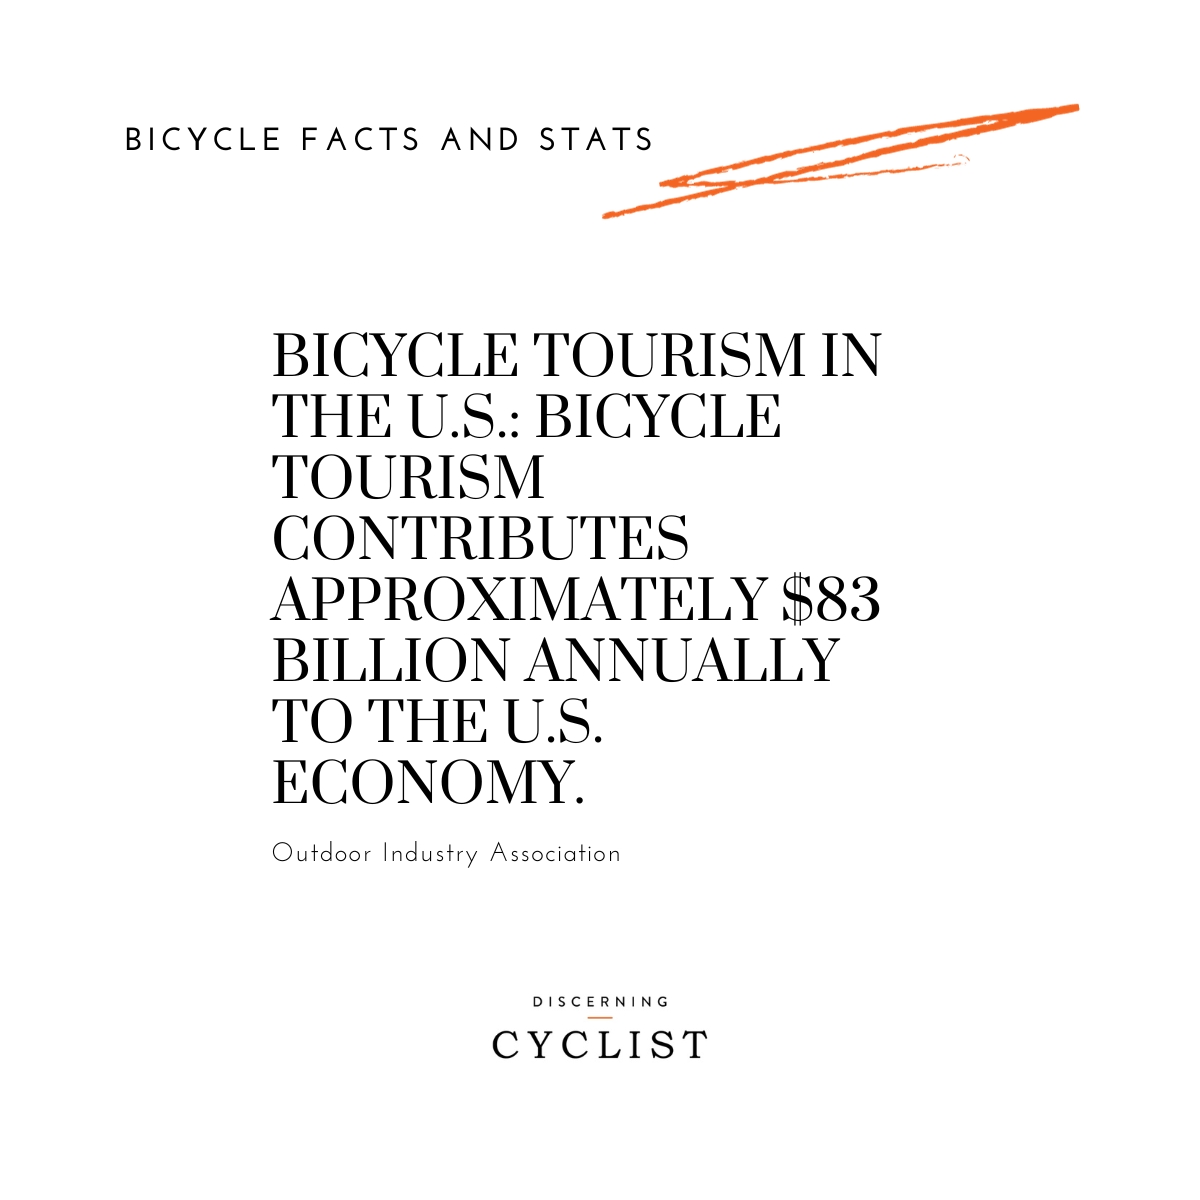 Bicycle Tourism in the U.S.: Bicycle tourism contributes approximately $83 billion annually to the U.S. economy.